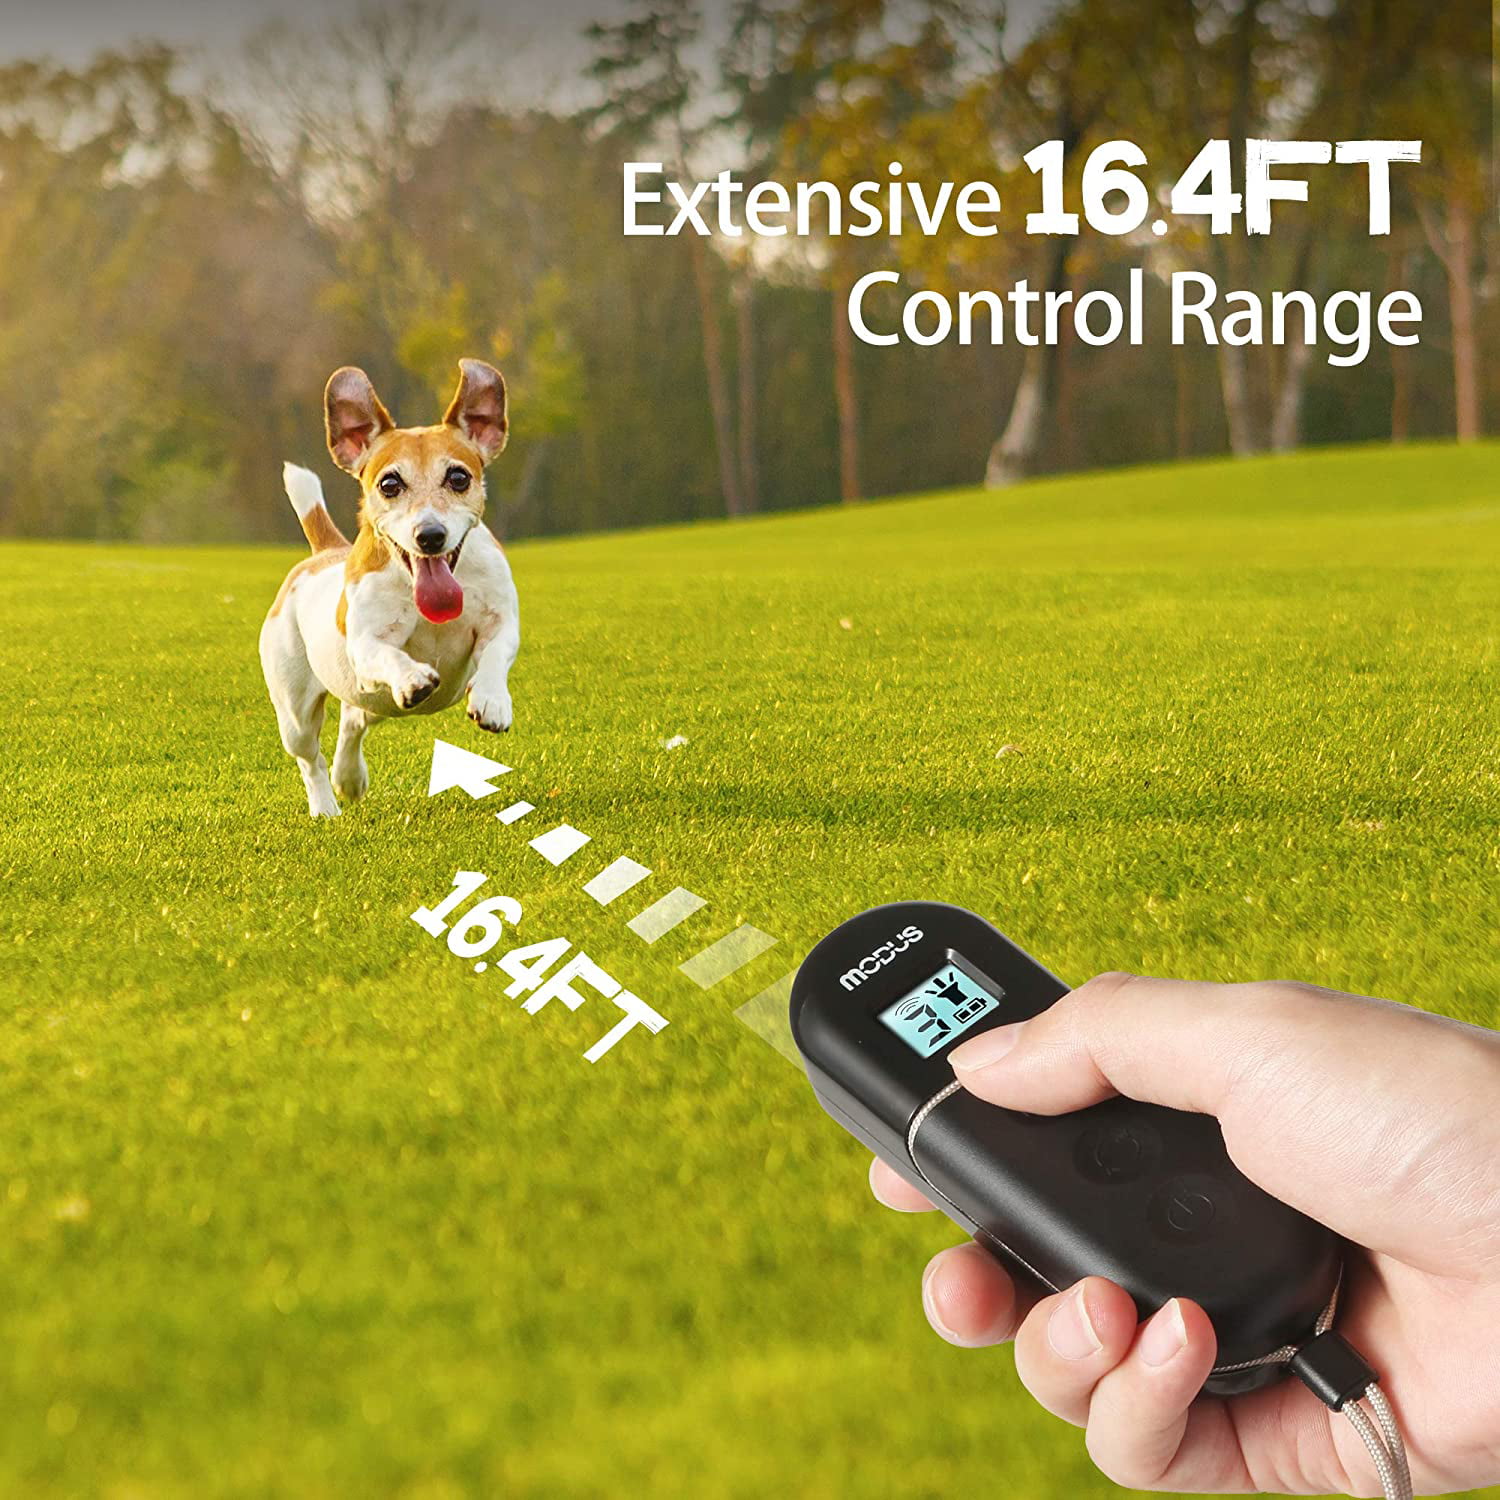 3 Ultrasonic Modes MODUS Anti-Barking Device Control Range up to 16.4 Ft Outdoor and Indoor 3 in 1 Dog Training Device LCD Screen Display Rechargeable Dog Barking Deterrent via USB Port 